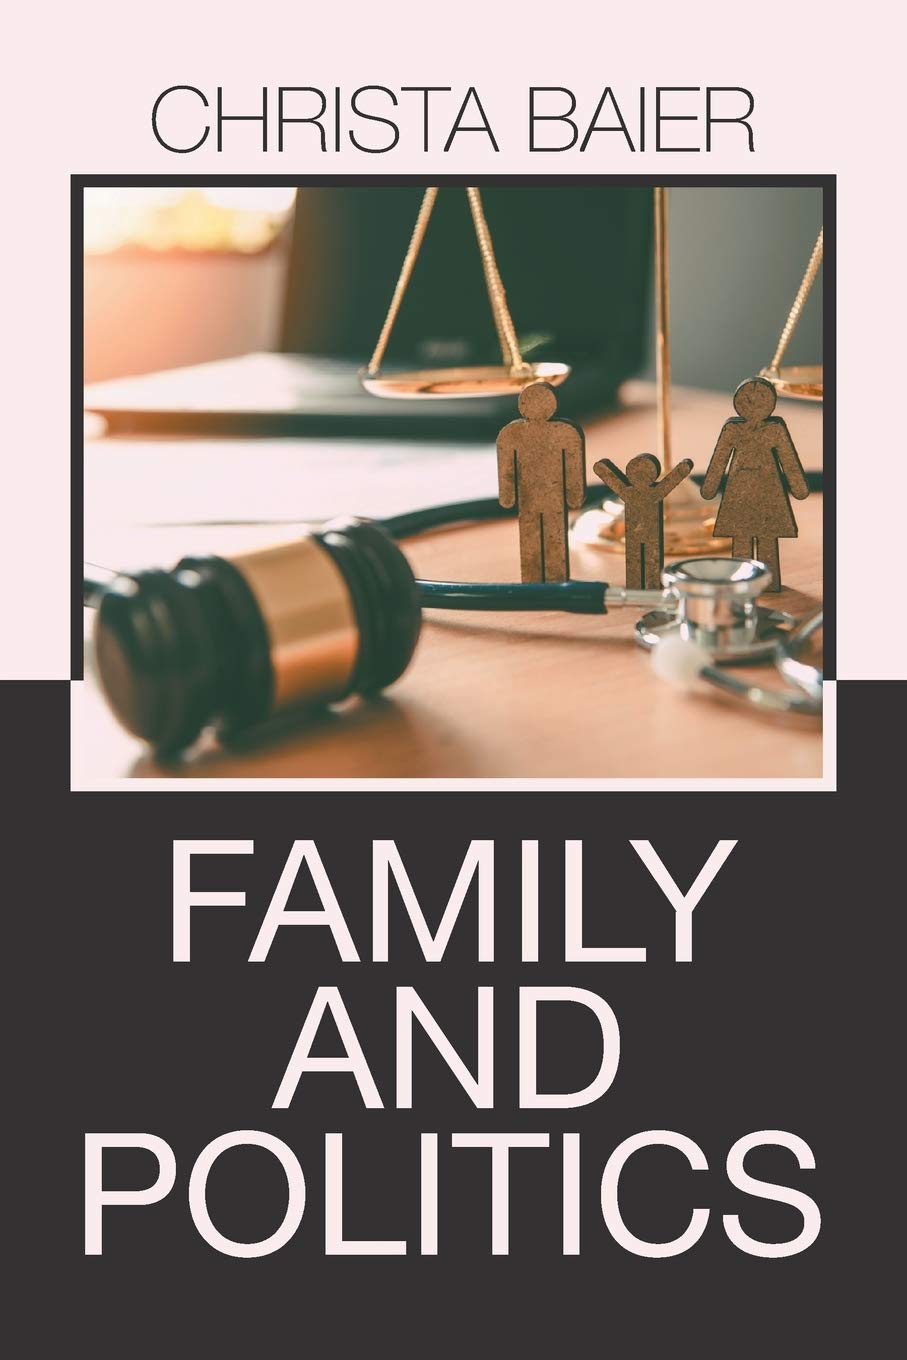 Christa Baier Addresses Family and Politics in Her Book With Support from Author’s Tranquility Press 1